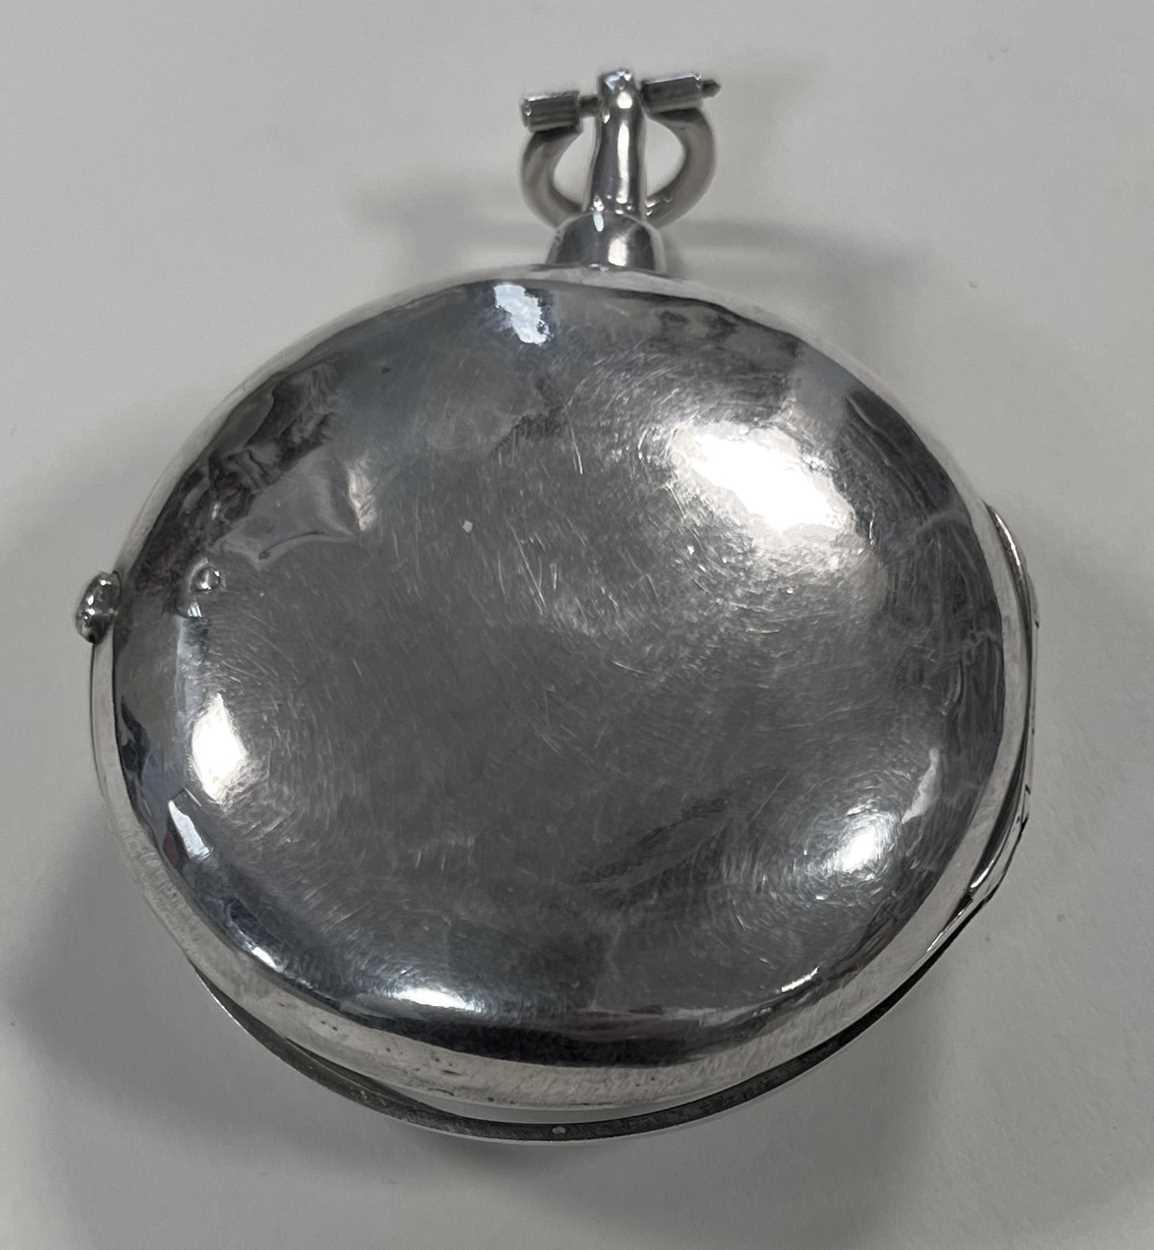 D. Edmonds, Liverpool - An early 19th century Sterling silver pair cased pocket watch, - Image 2 of 9